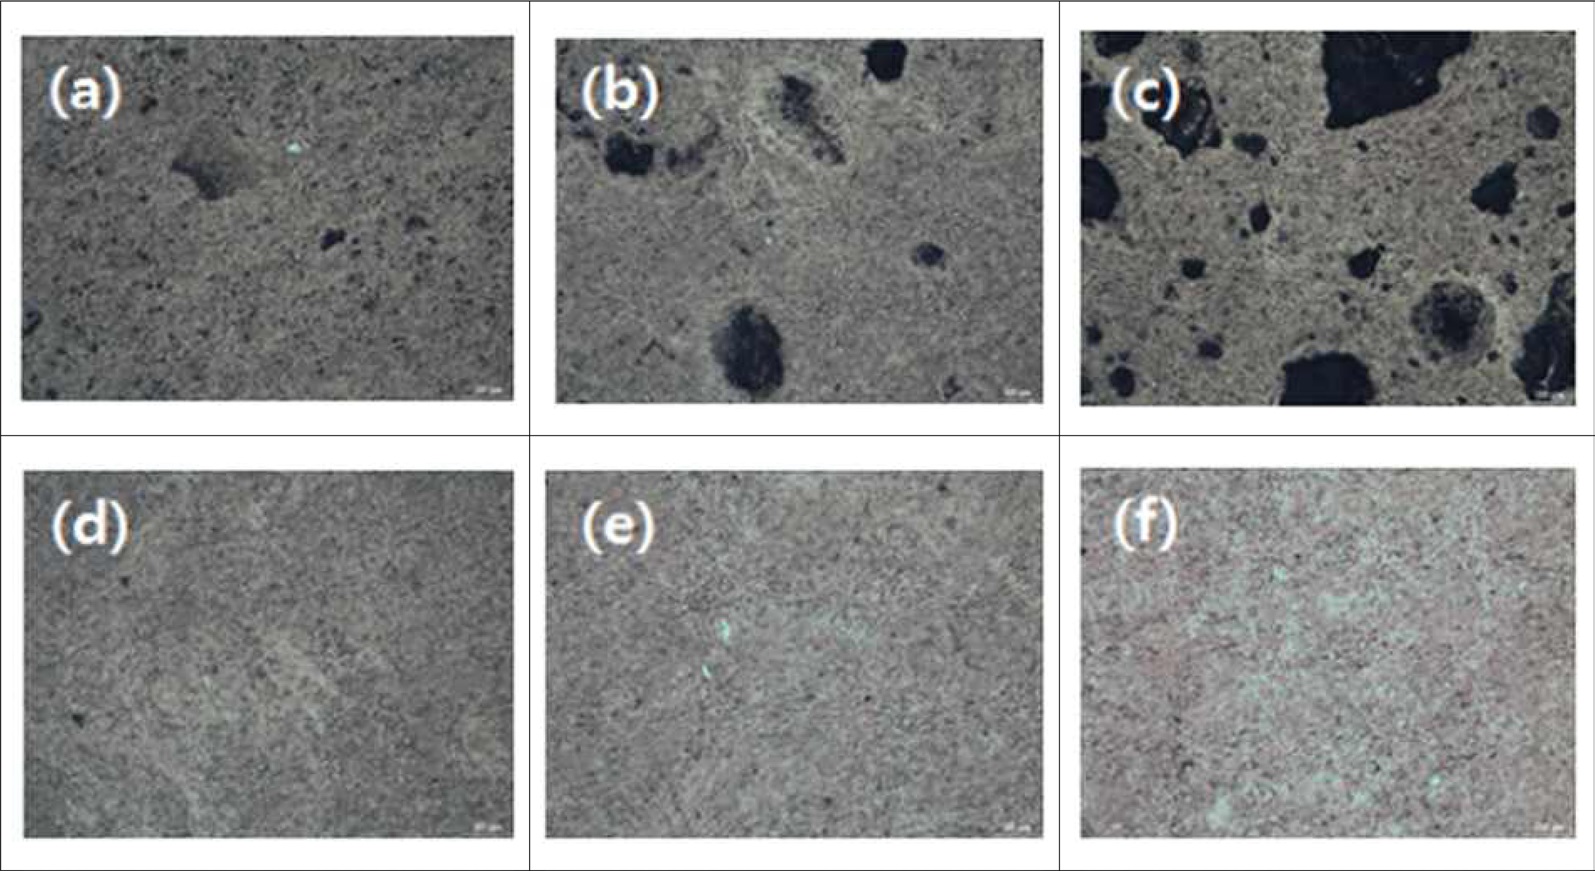 Optical microscopy images (×100) of GCTP300-IM (a), GCTP500-IM (b), GCTP700-IM (c), GPR300-IM (d), GPR500-IM (e), GPR700-IM (f). GCTP: graded coal tar pitch, GPR: graded phenolic resin.